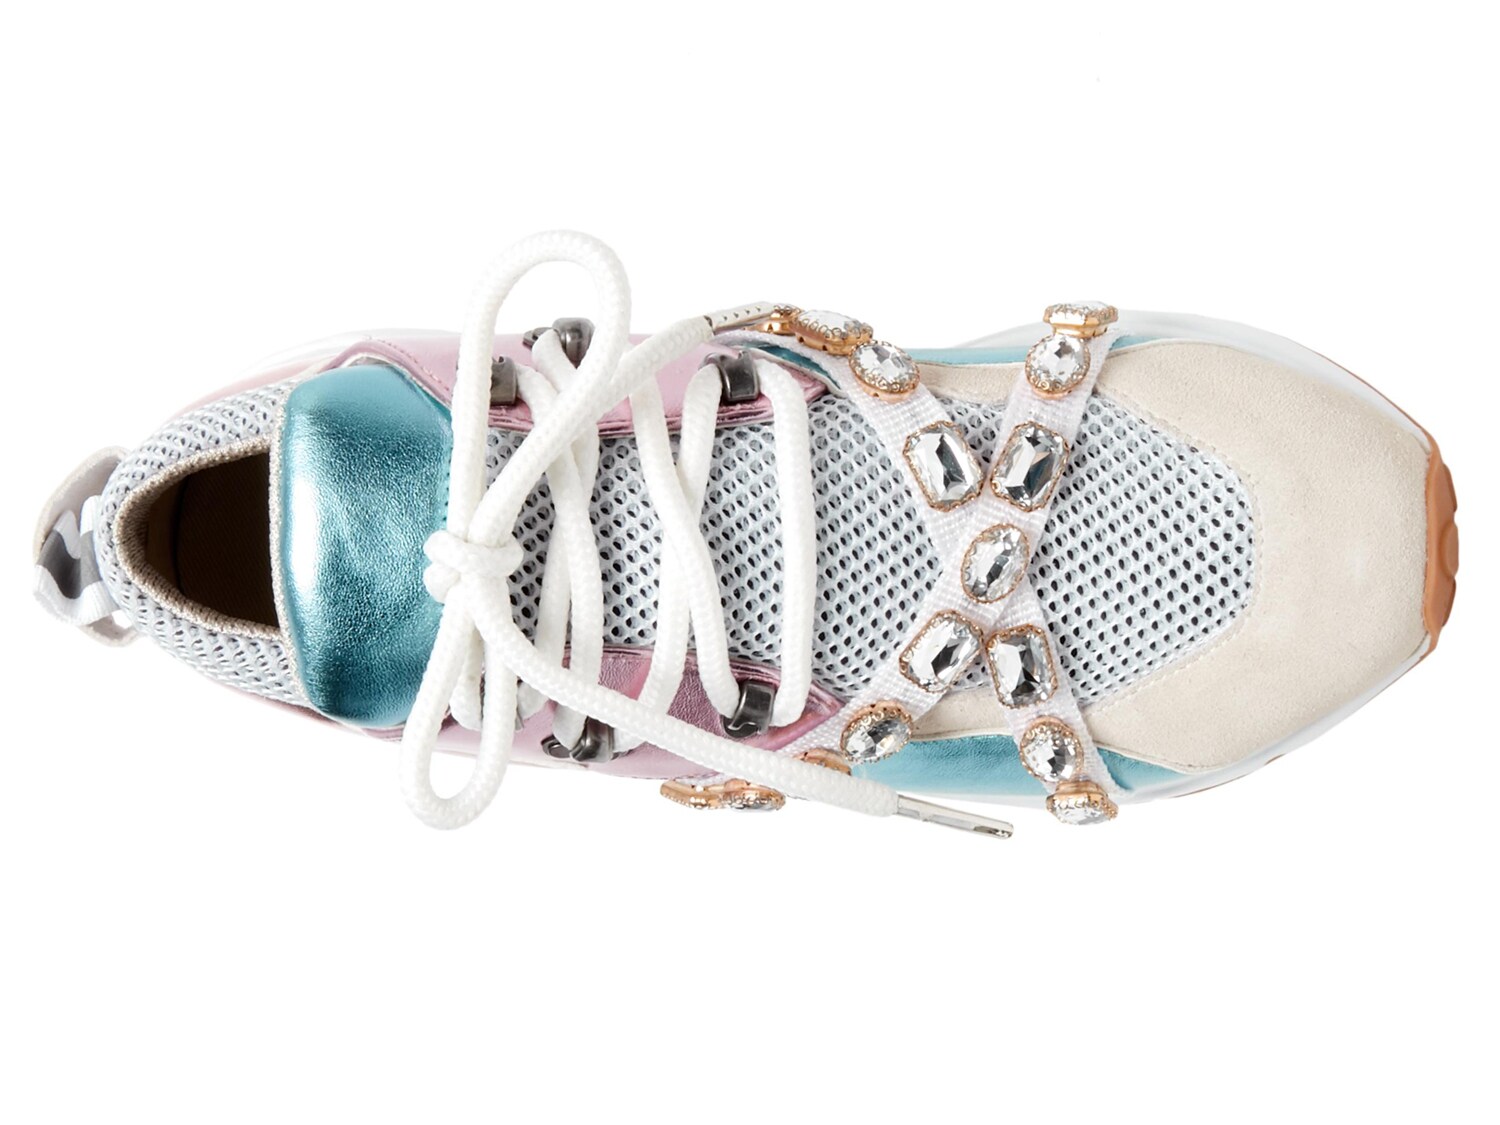 steve madden women's credit jeweled sneakers